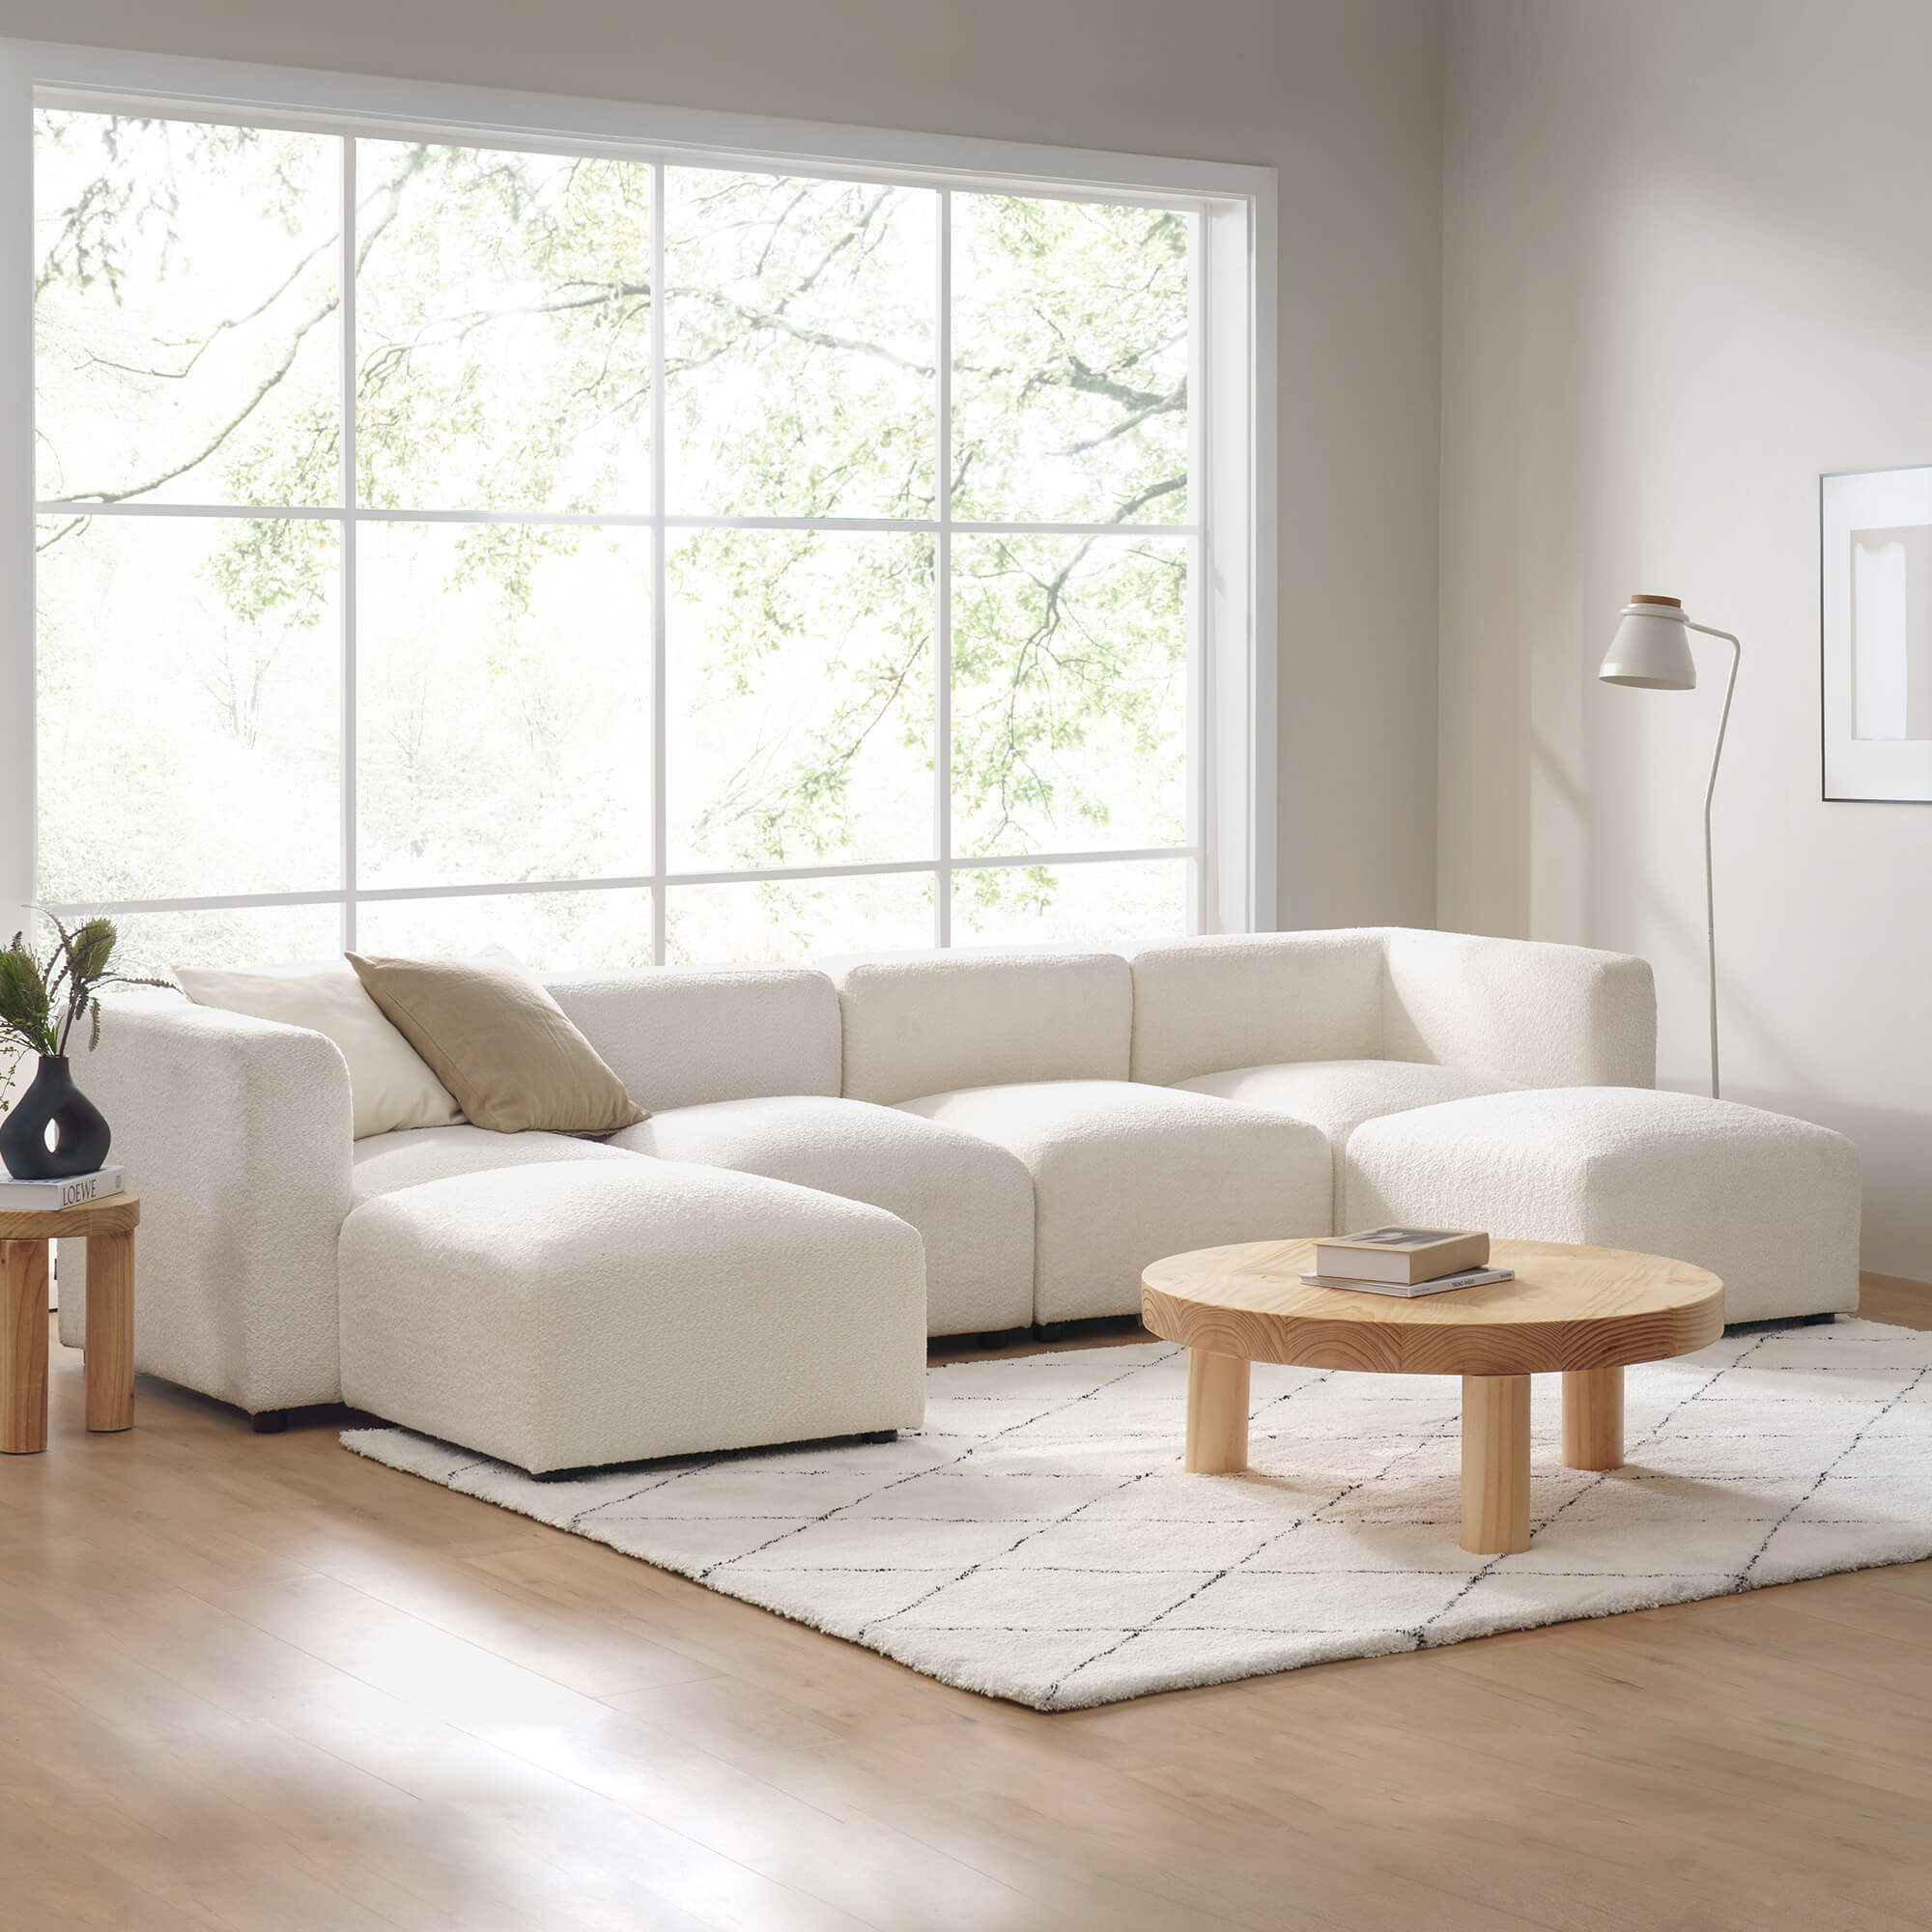 The Luca Double Chaise Sectional Sofa as the centerpiece in a contemporary living room